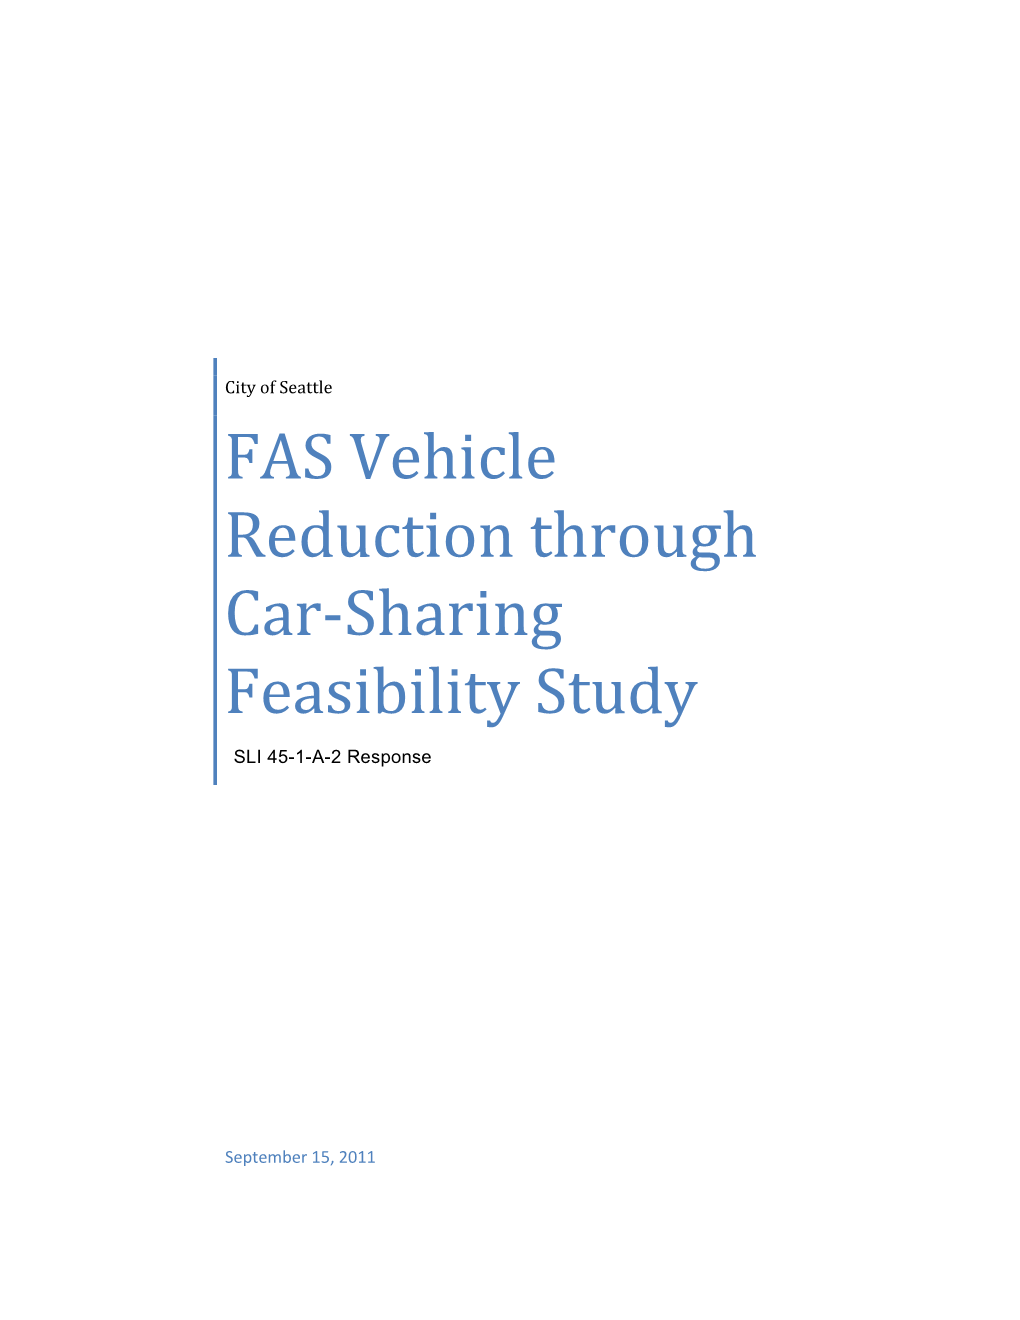 FAS Vehicle Reduction Through Car-Sharing Feasibility Study